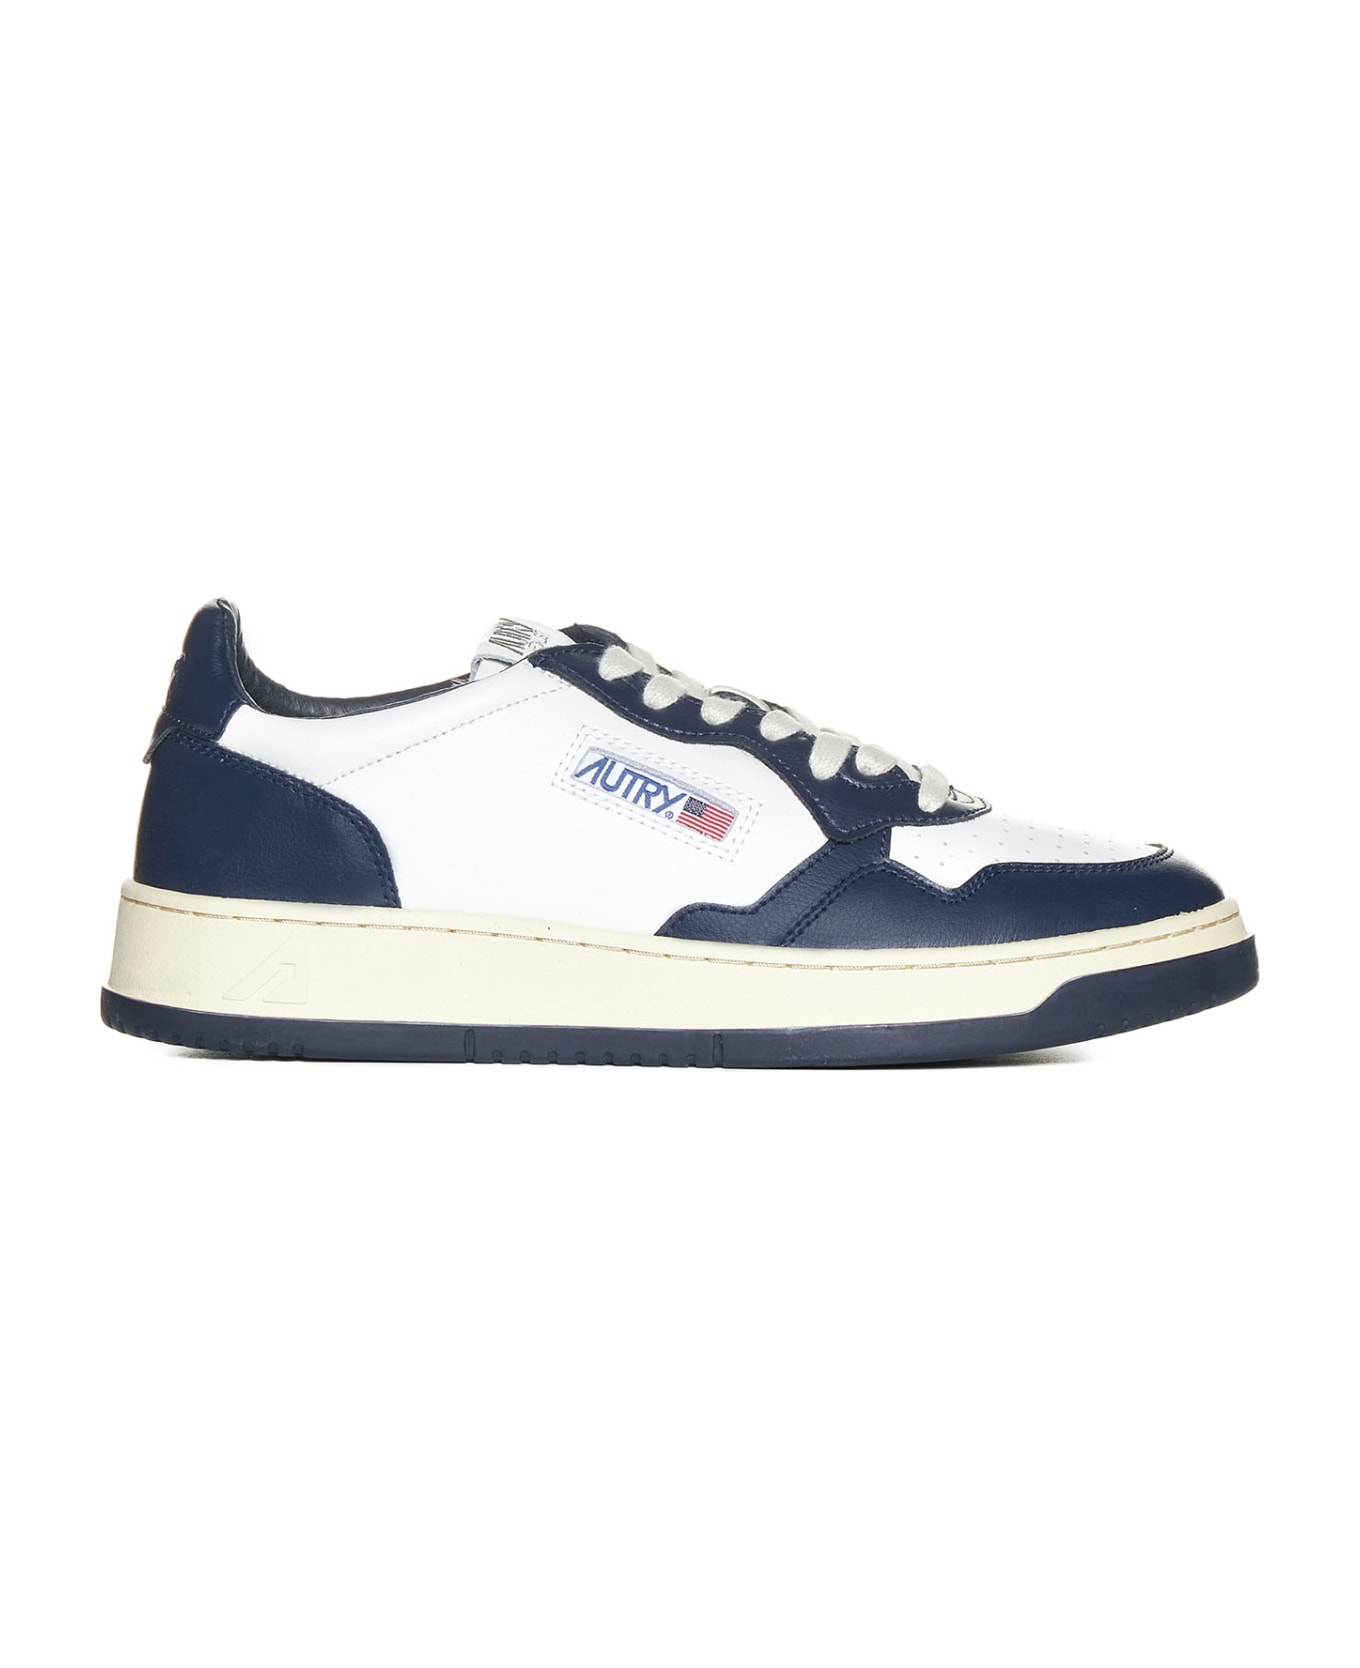 Autry Sneakers - Wht blue スニーカー